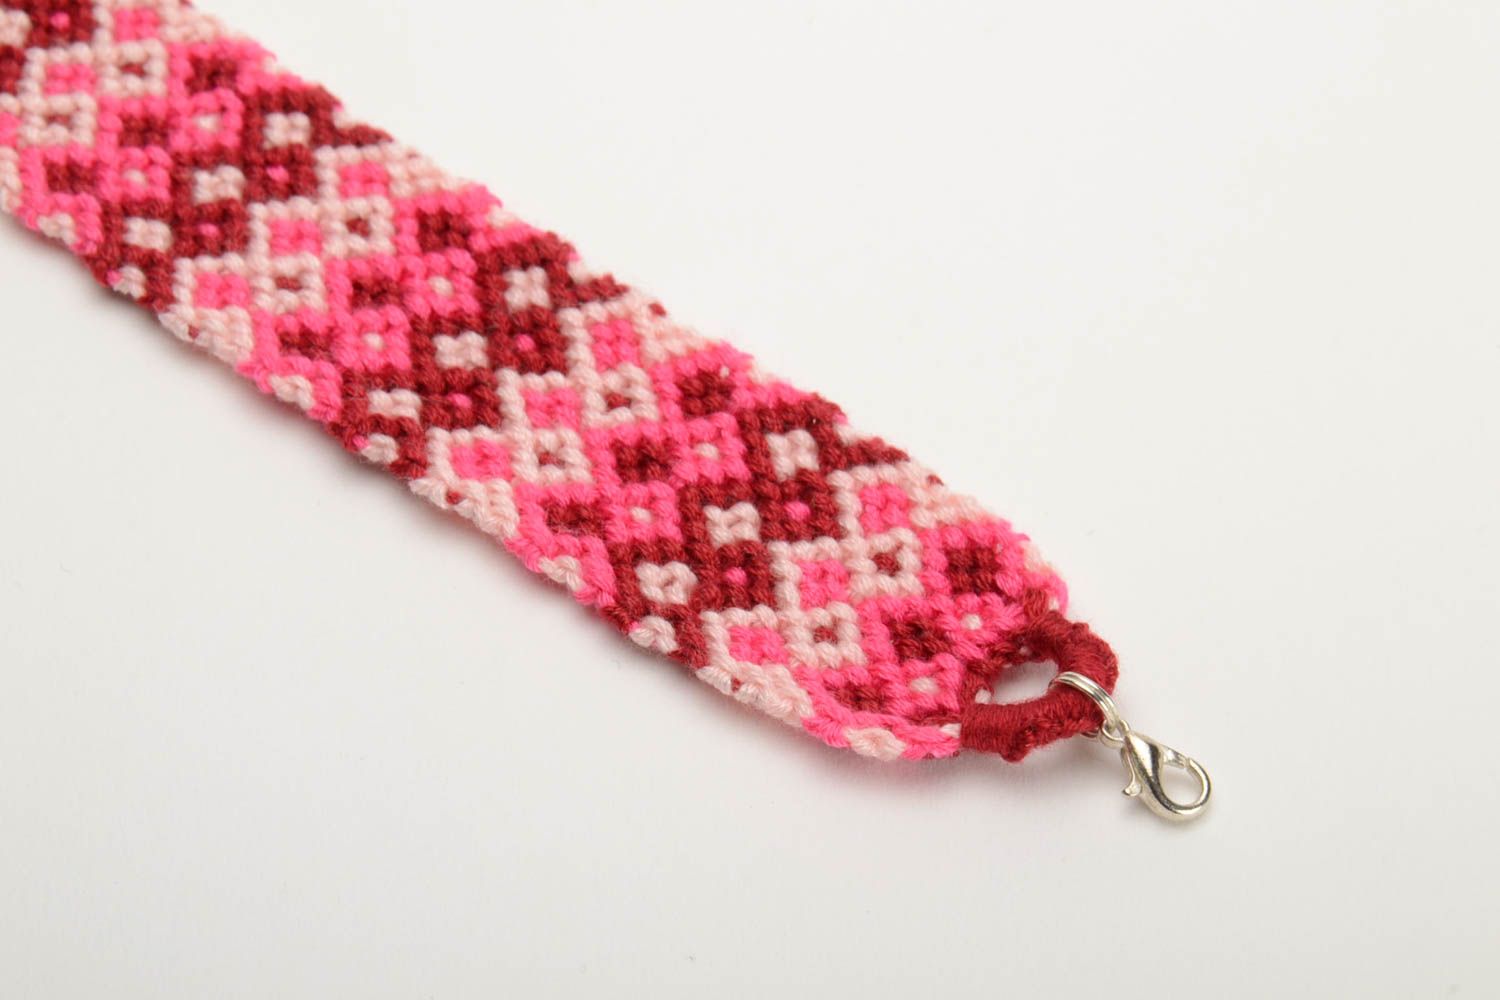 Beautiful dark red and pink handmade wide bracelet woven of embroidery floss photo 2